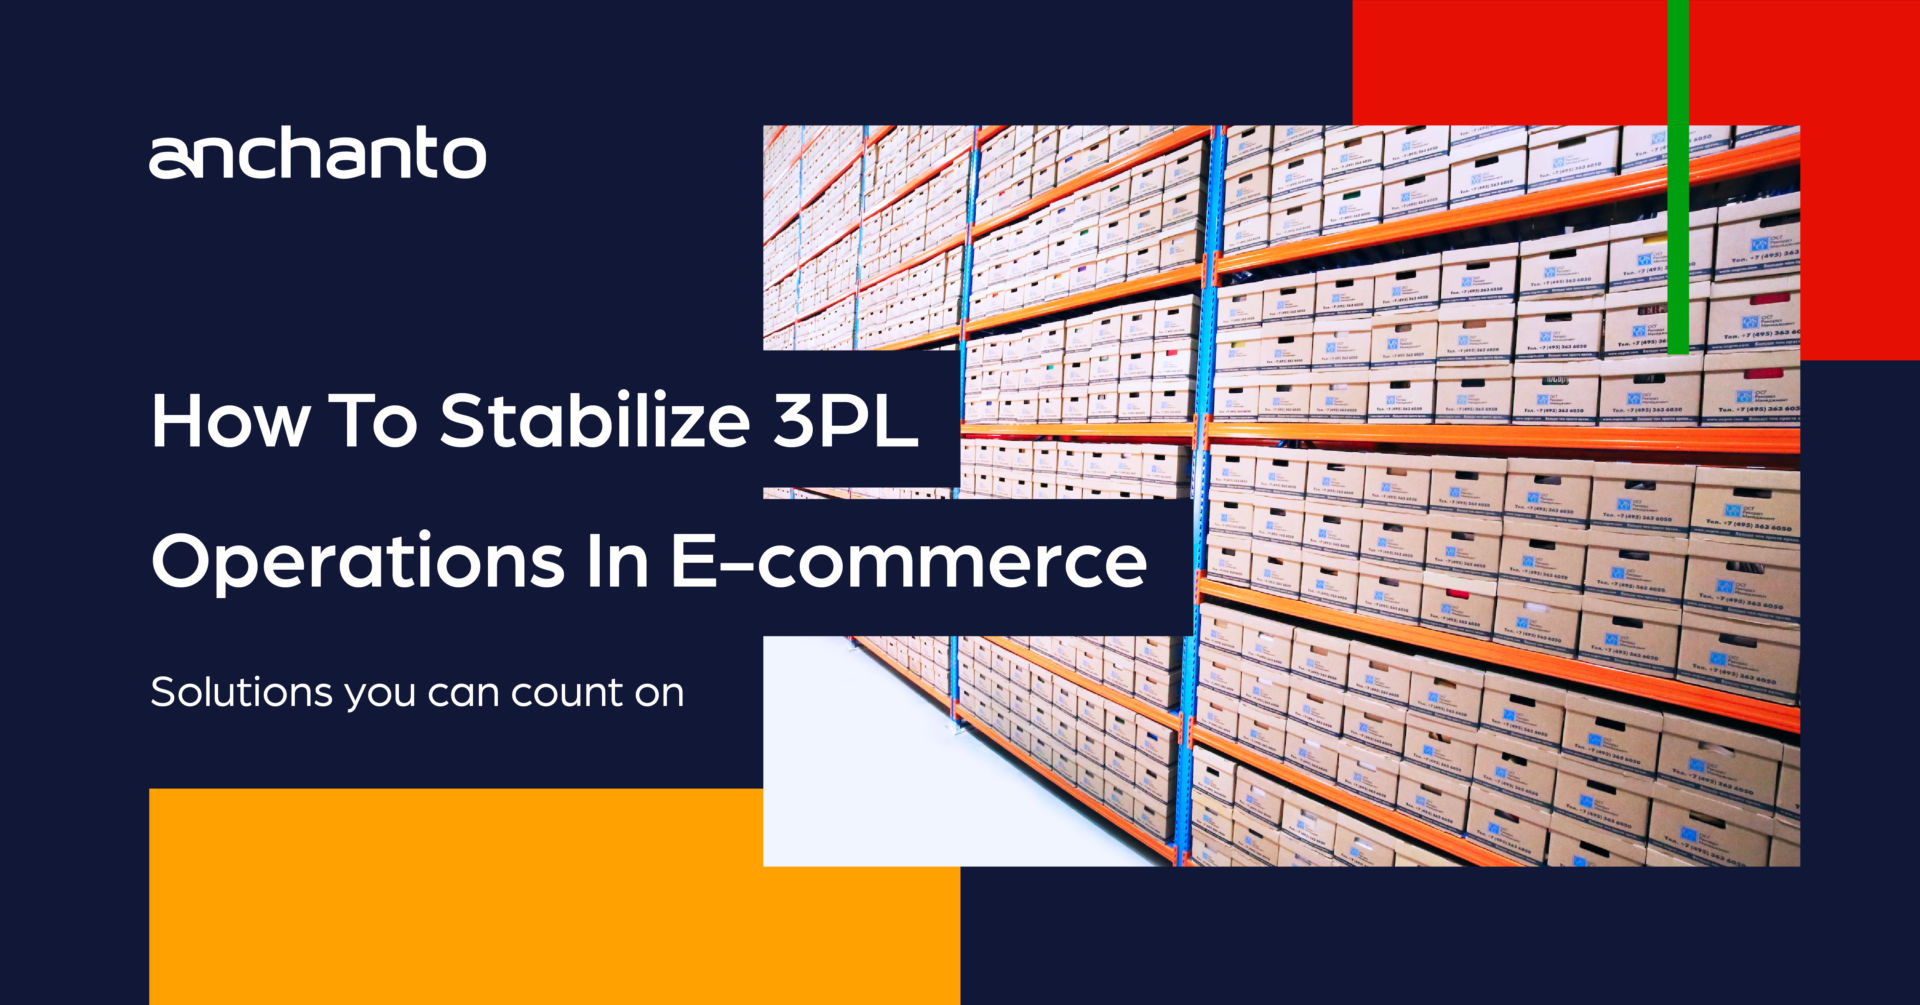 How To Stabilize 3PL Operations In E-commerce: Solutions You Can Count On